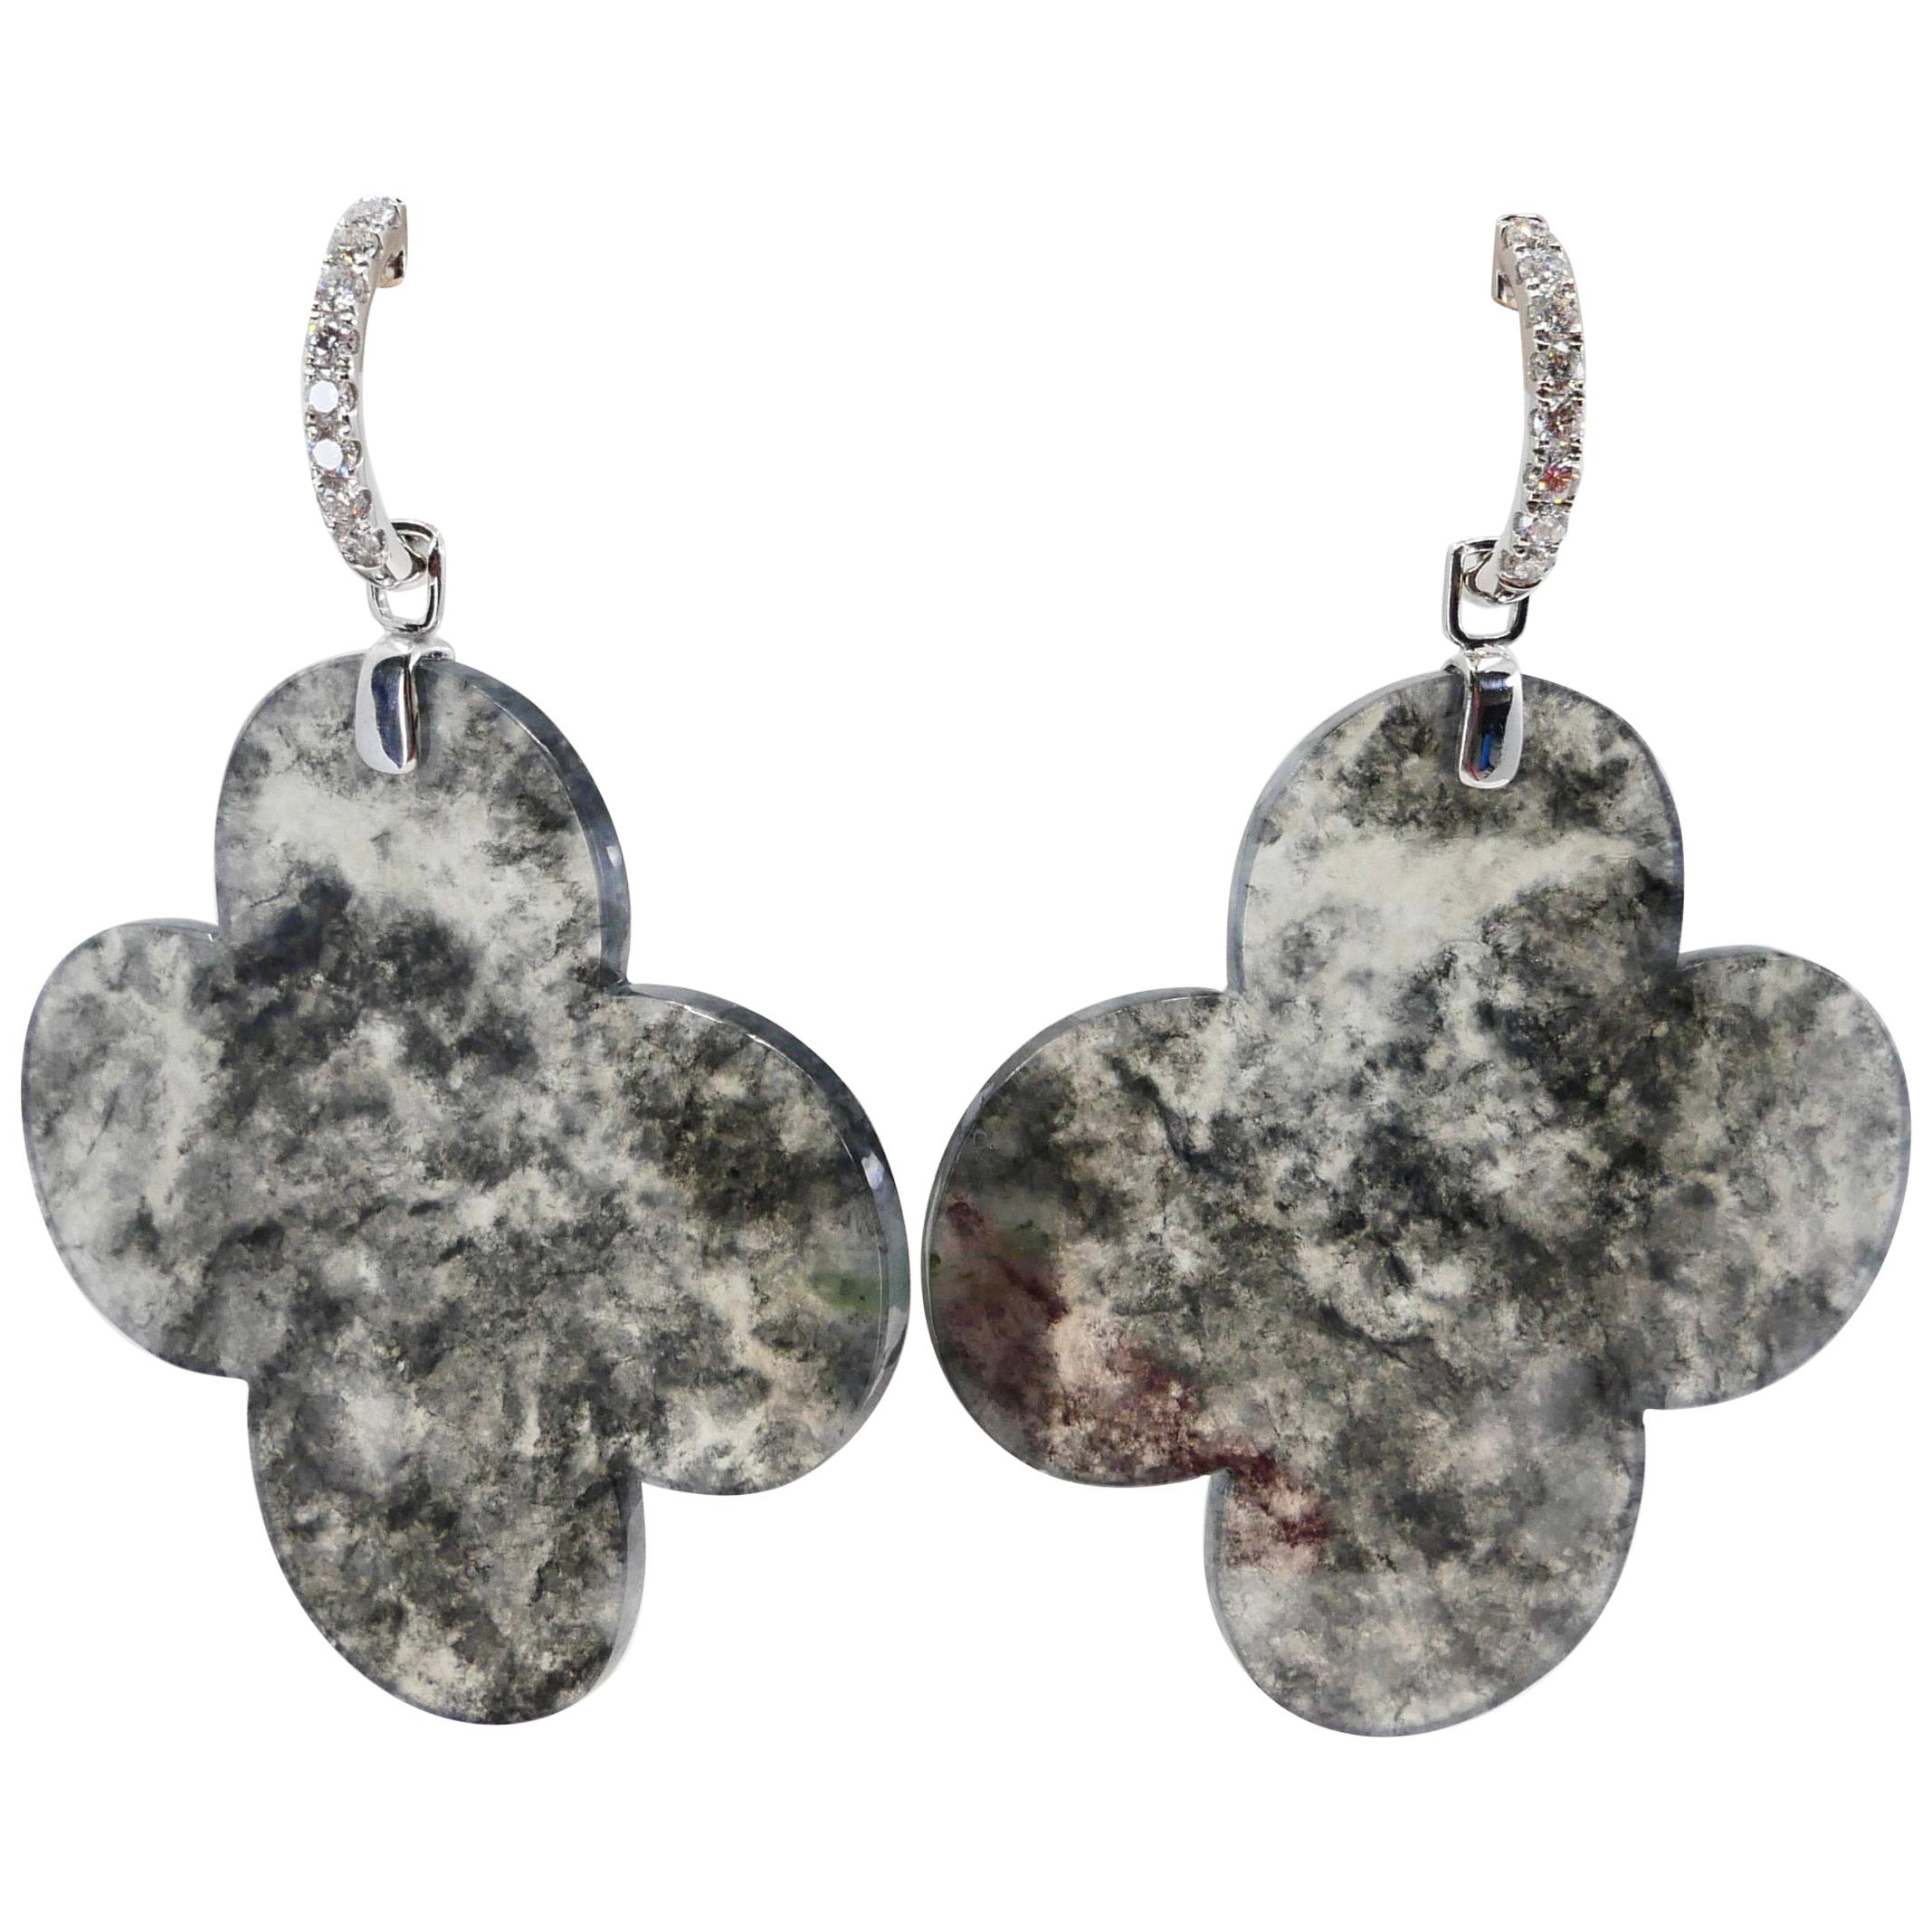 Certified Icy Black Jadeite Jade and Diamond Earrings Statement Extra Large Size For Sale